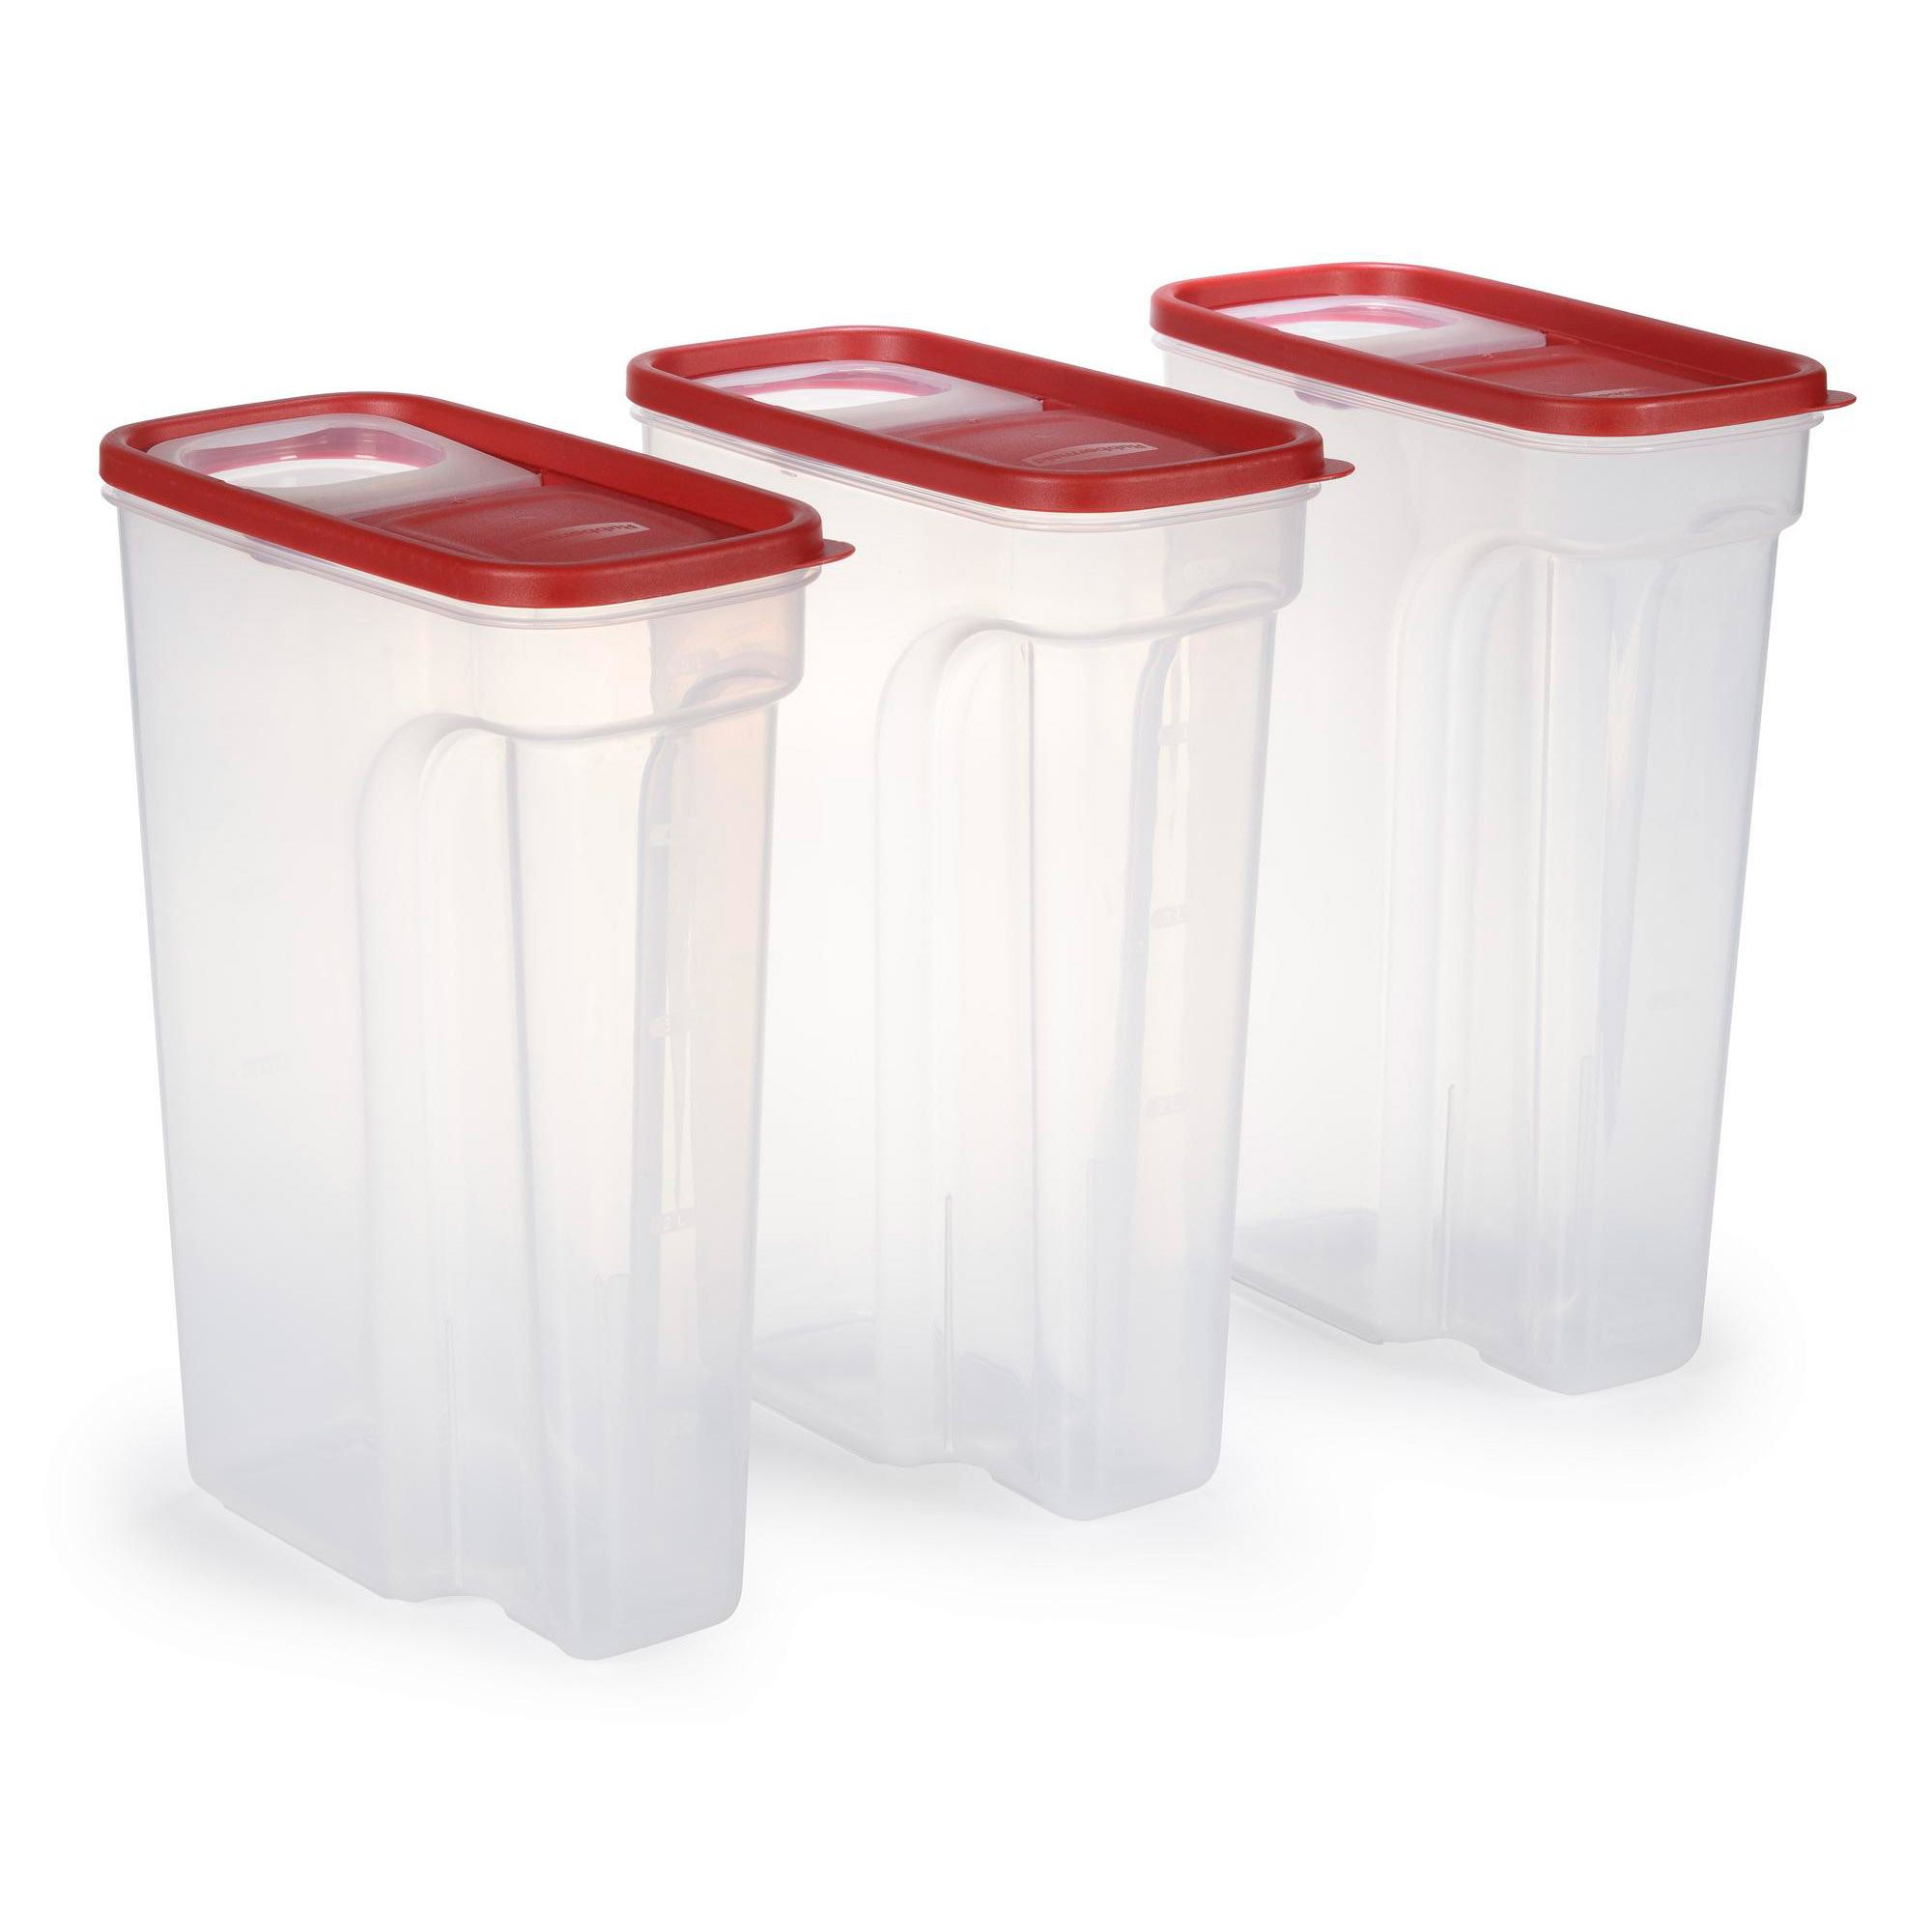  Rubbermaid Flip Top Cereal Keeper, Modular Food Storage  Container, 3 Pack, (2) 22-Cup (1) 18-Cup: Home & Kitchen